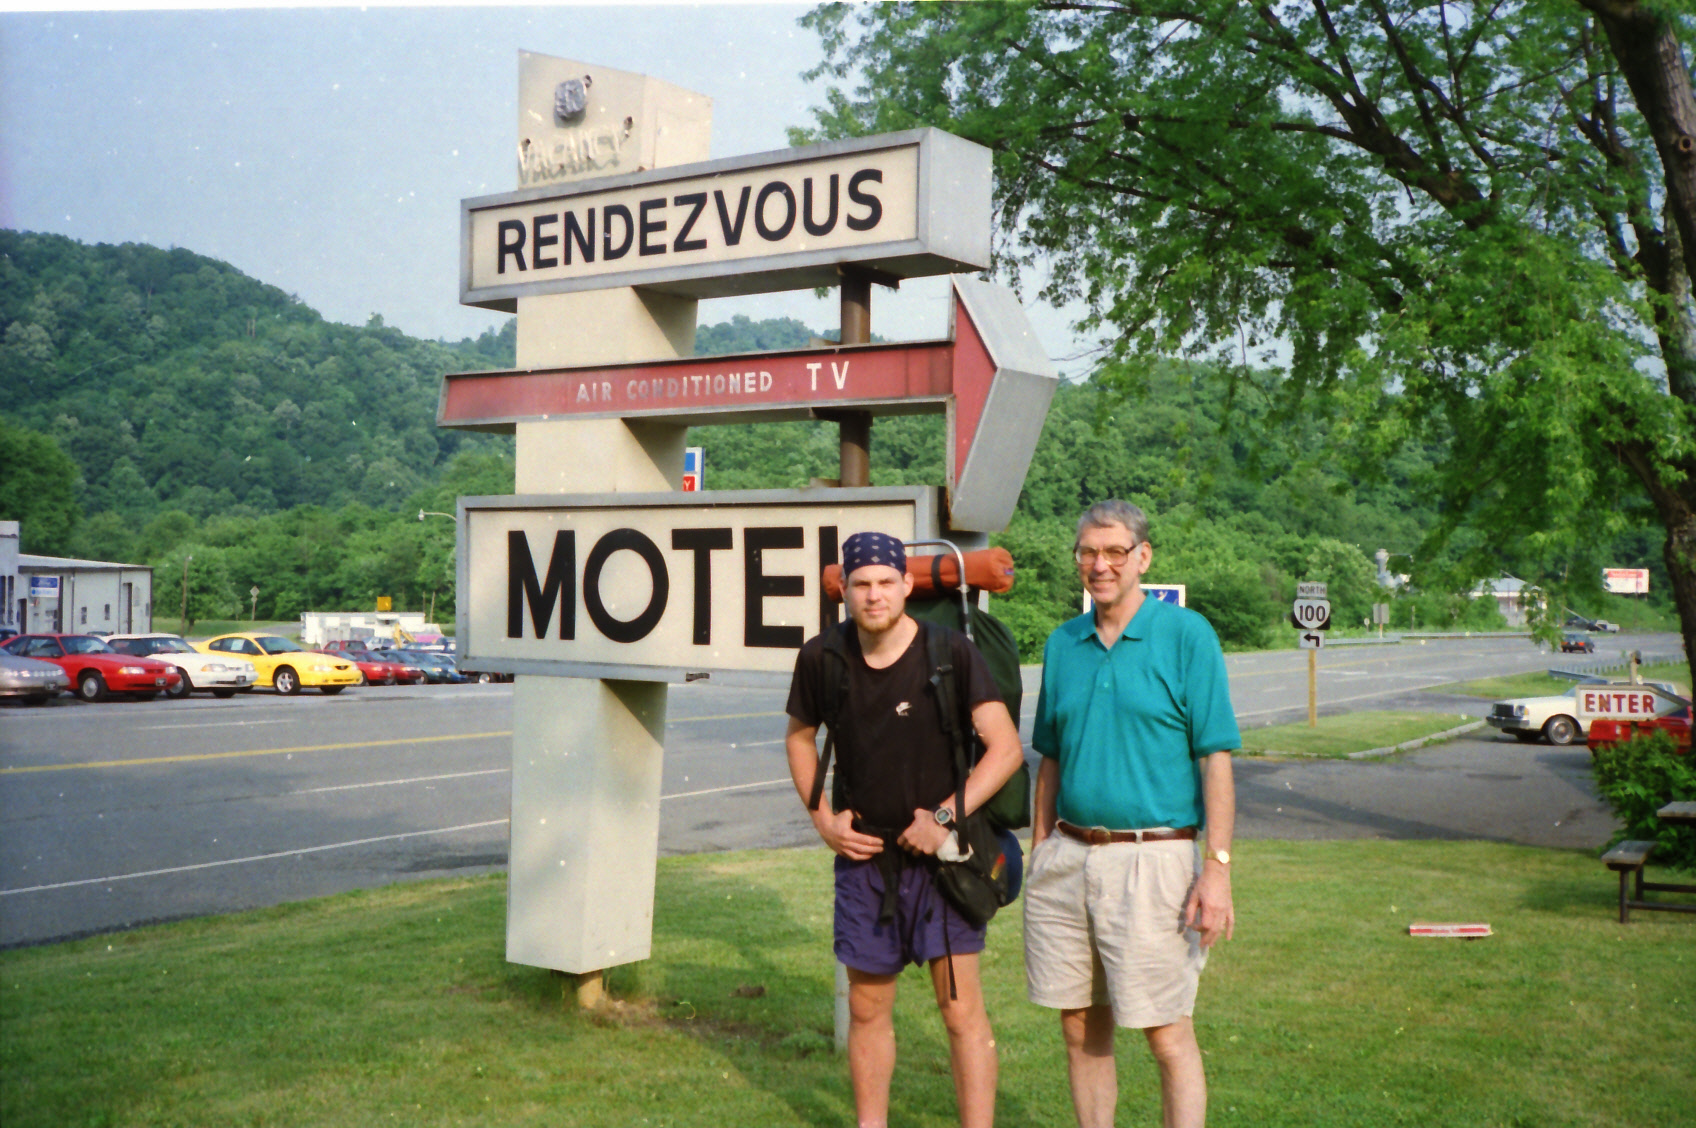 RENDEZVOUS MOTEL CATCHES FIRE NEAR THE APPALACHIAN TRAIL IN PEARISBURG, VA N2Backpacking